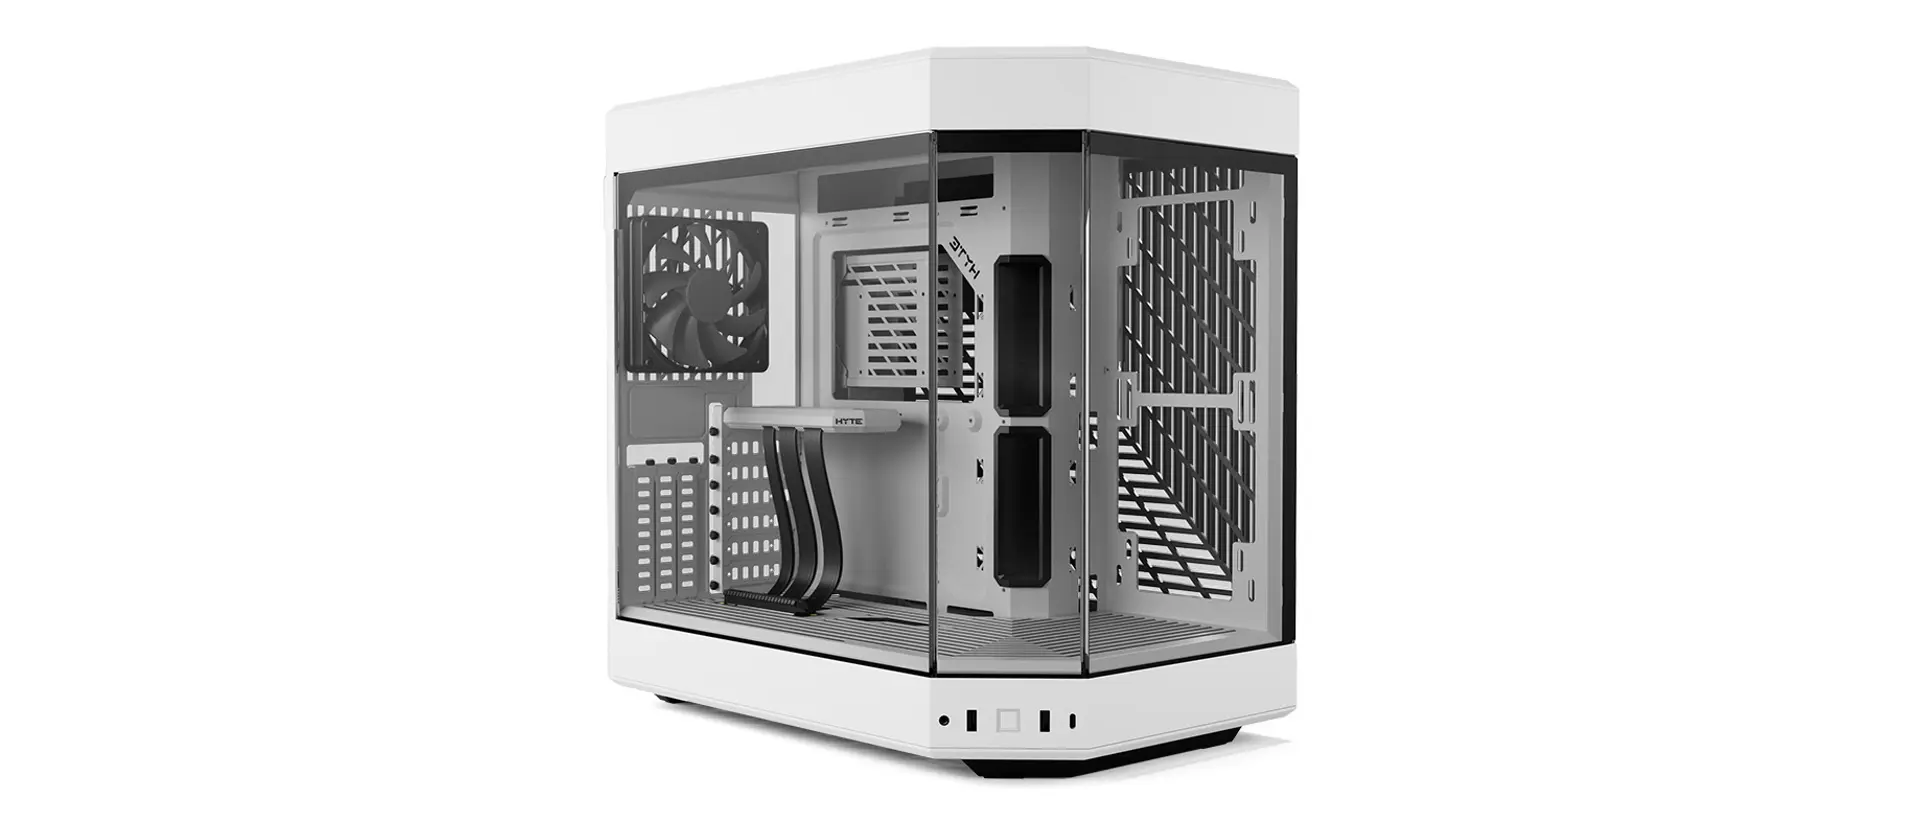 HYTE Y60 Steel/ABS/Tempered Glass ATX Mid Tower Computer Case CS-HYTE-Y60  Black/Red/White